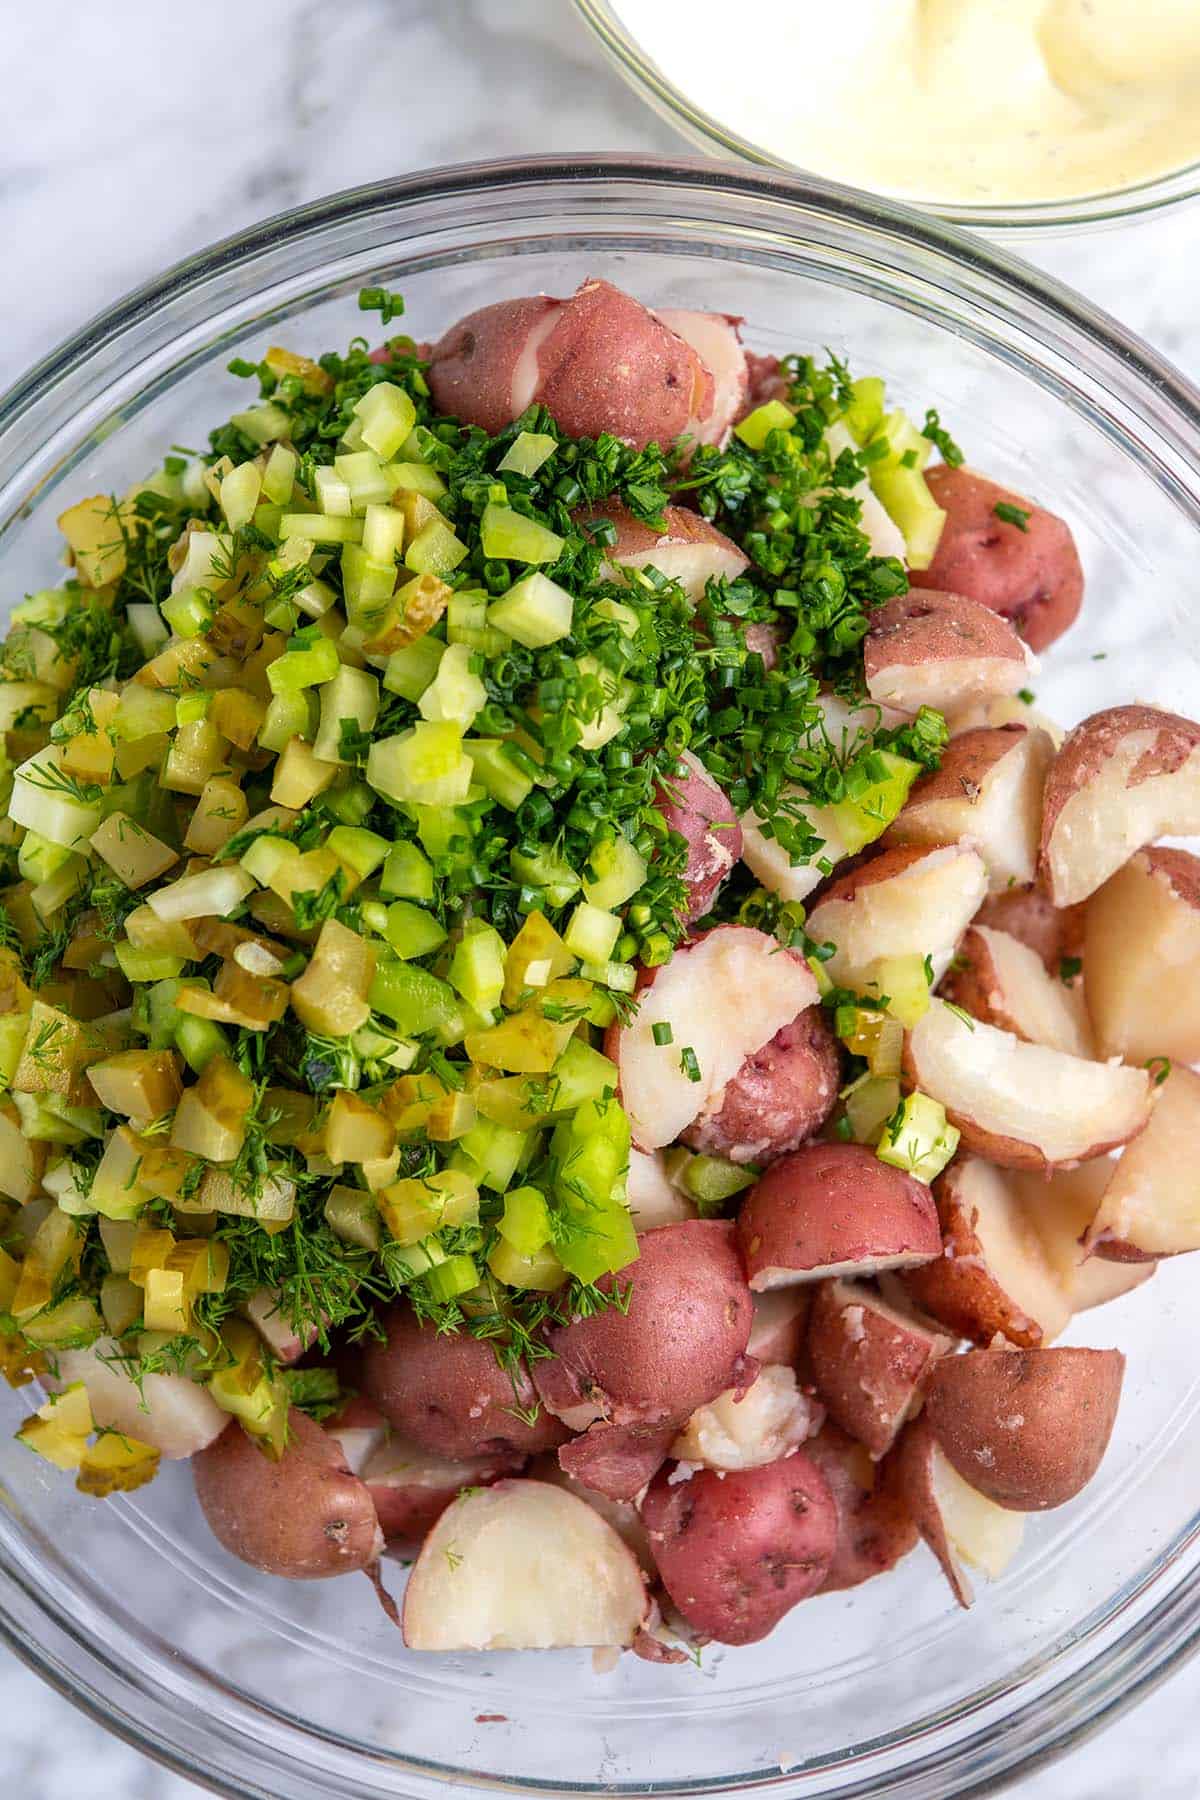 Making red potato salad -- Mixing bowl with red potatoes, herbs, chopped celery, and chopped pickles.